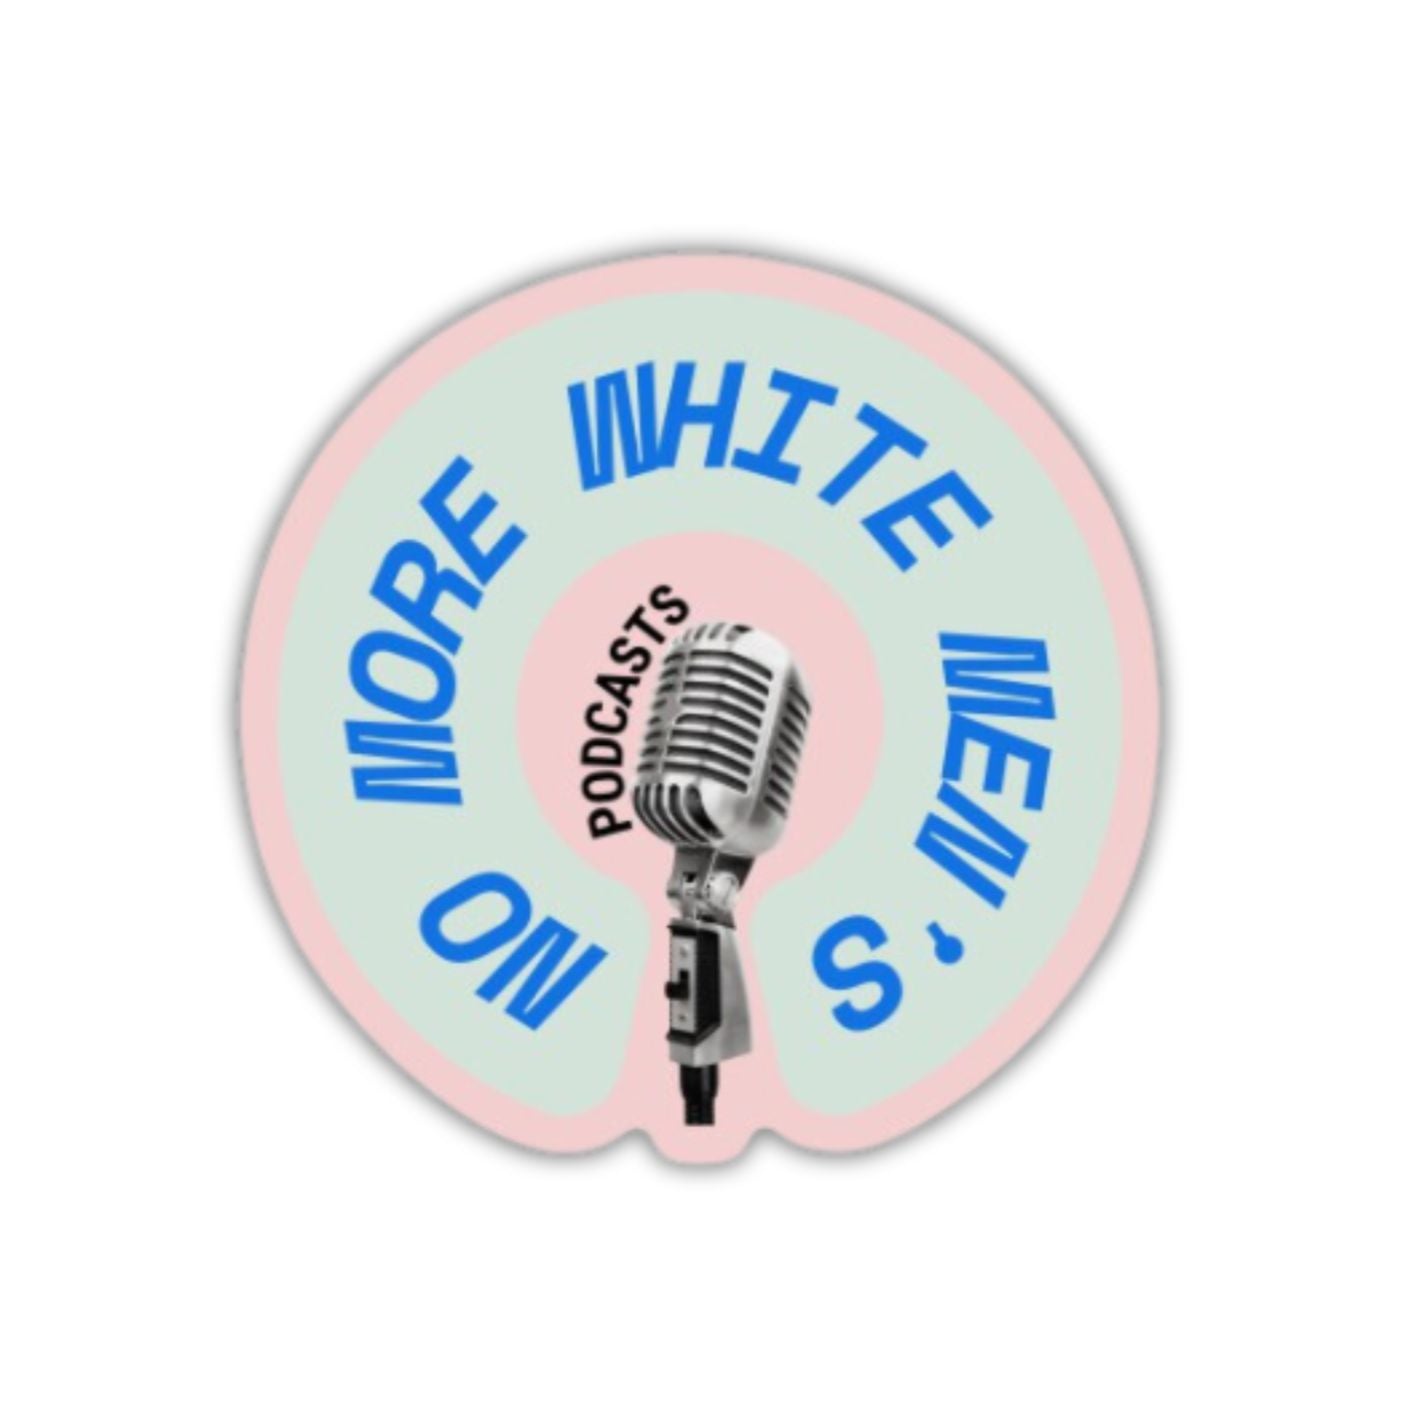 No More White Men's Podcasts Glossy Die Cut Vinyl Sticker 3in x 3in